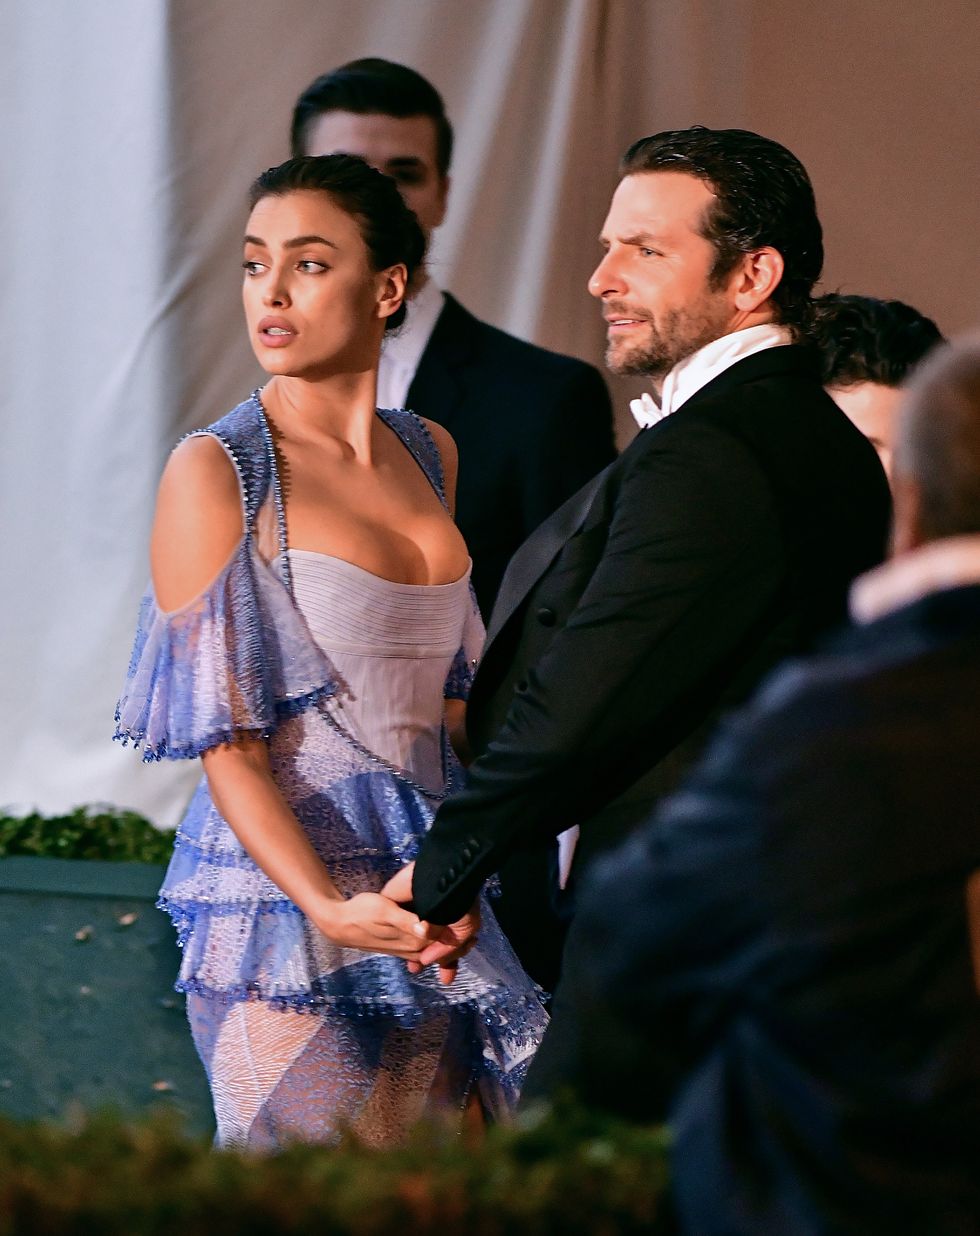 Why Bradley Cooper did not attend the Met Gala with Irina Shayk